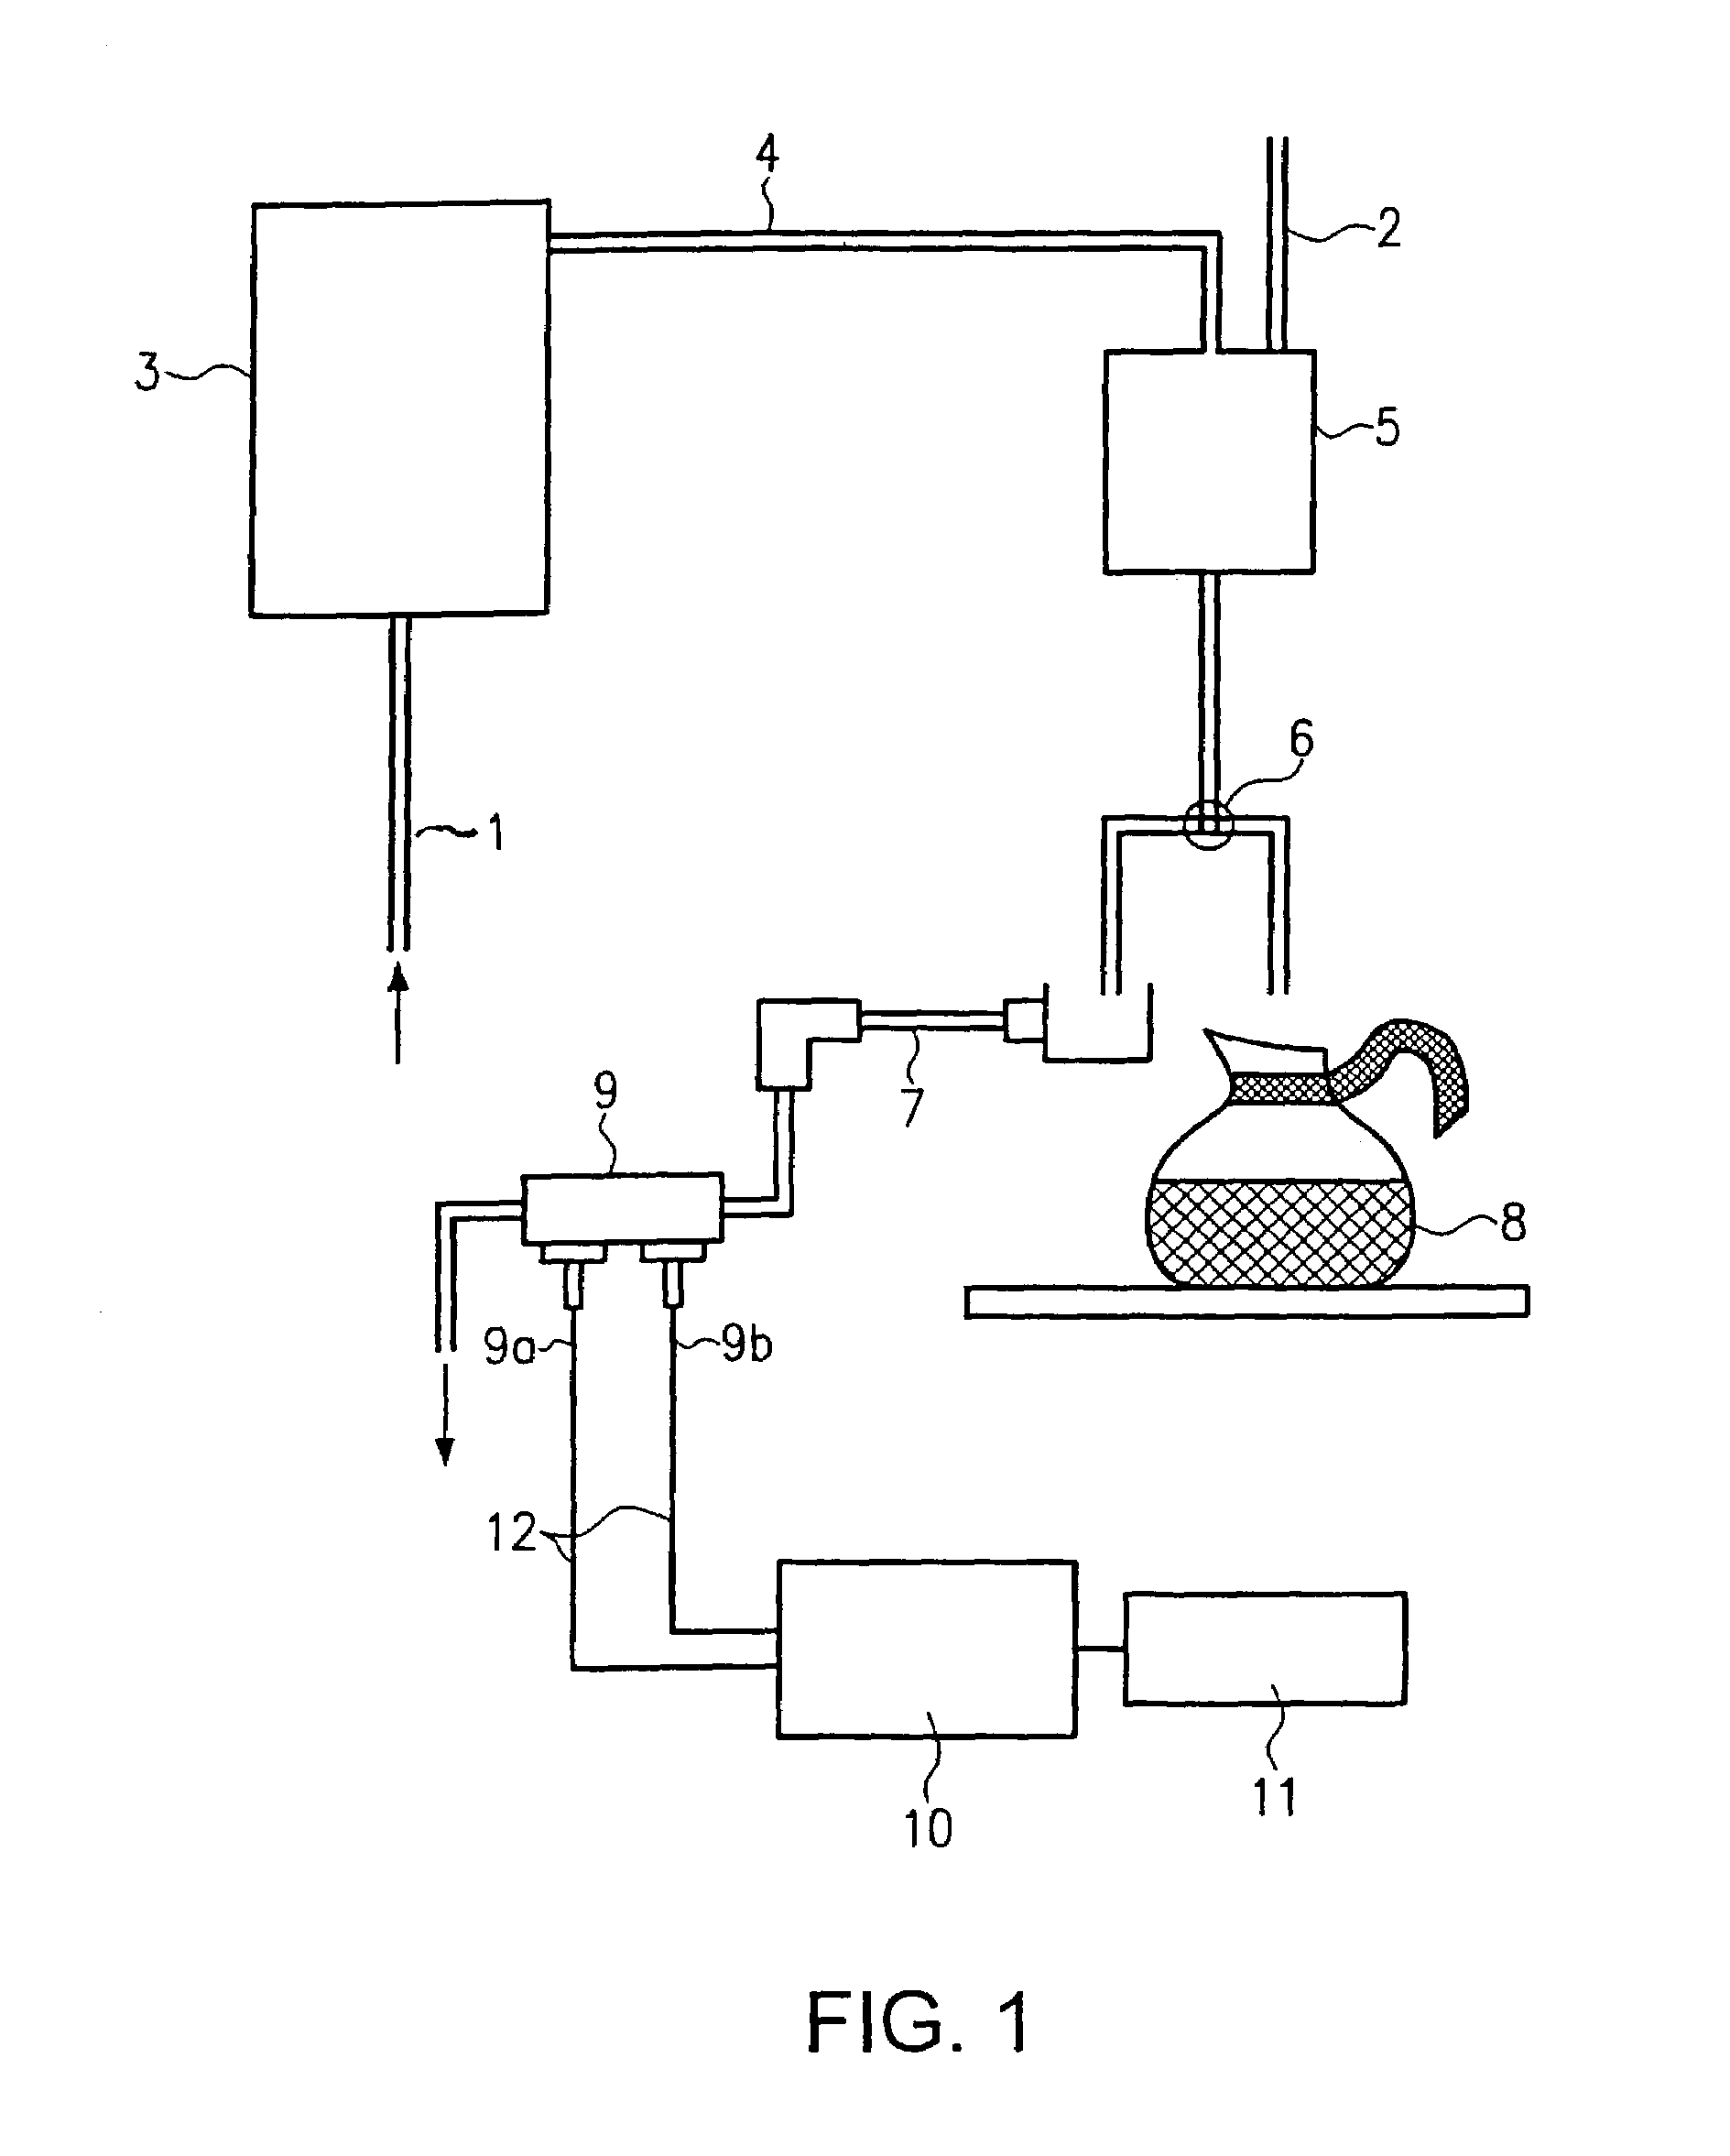 Unit for detecting an addition of a cleaning agent in a beverage dispenser